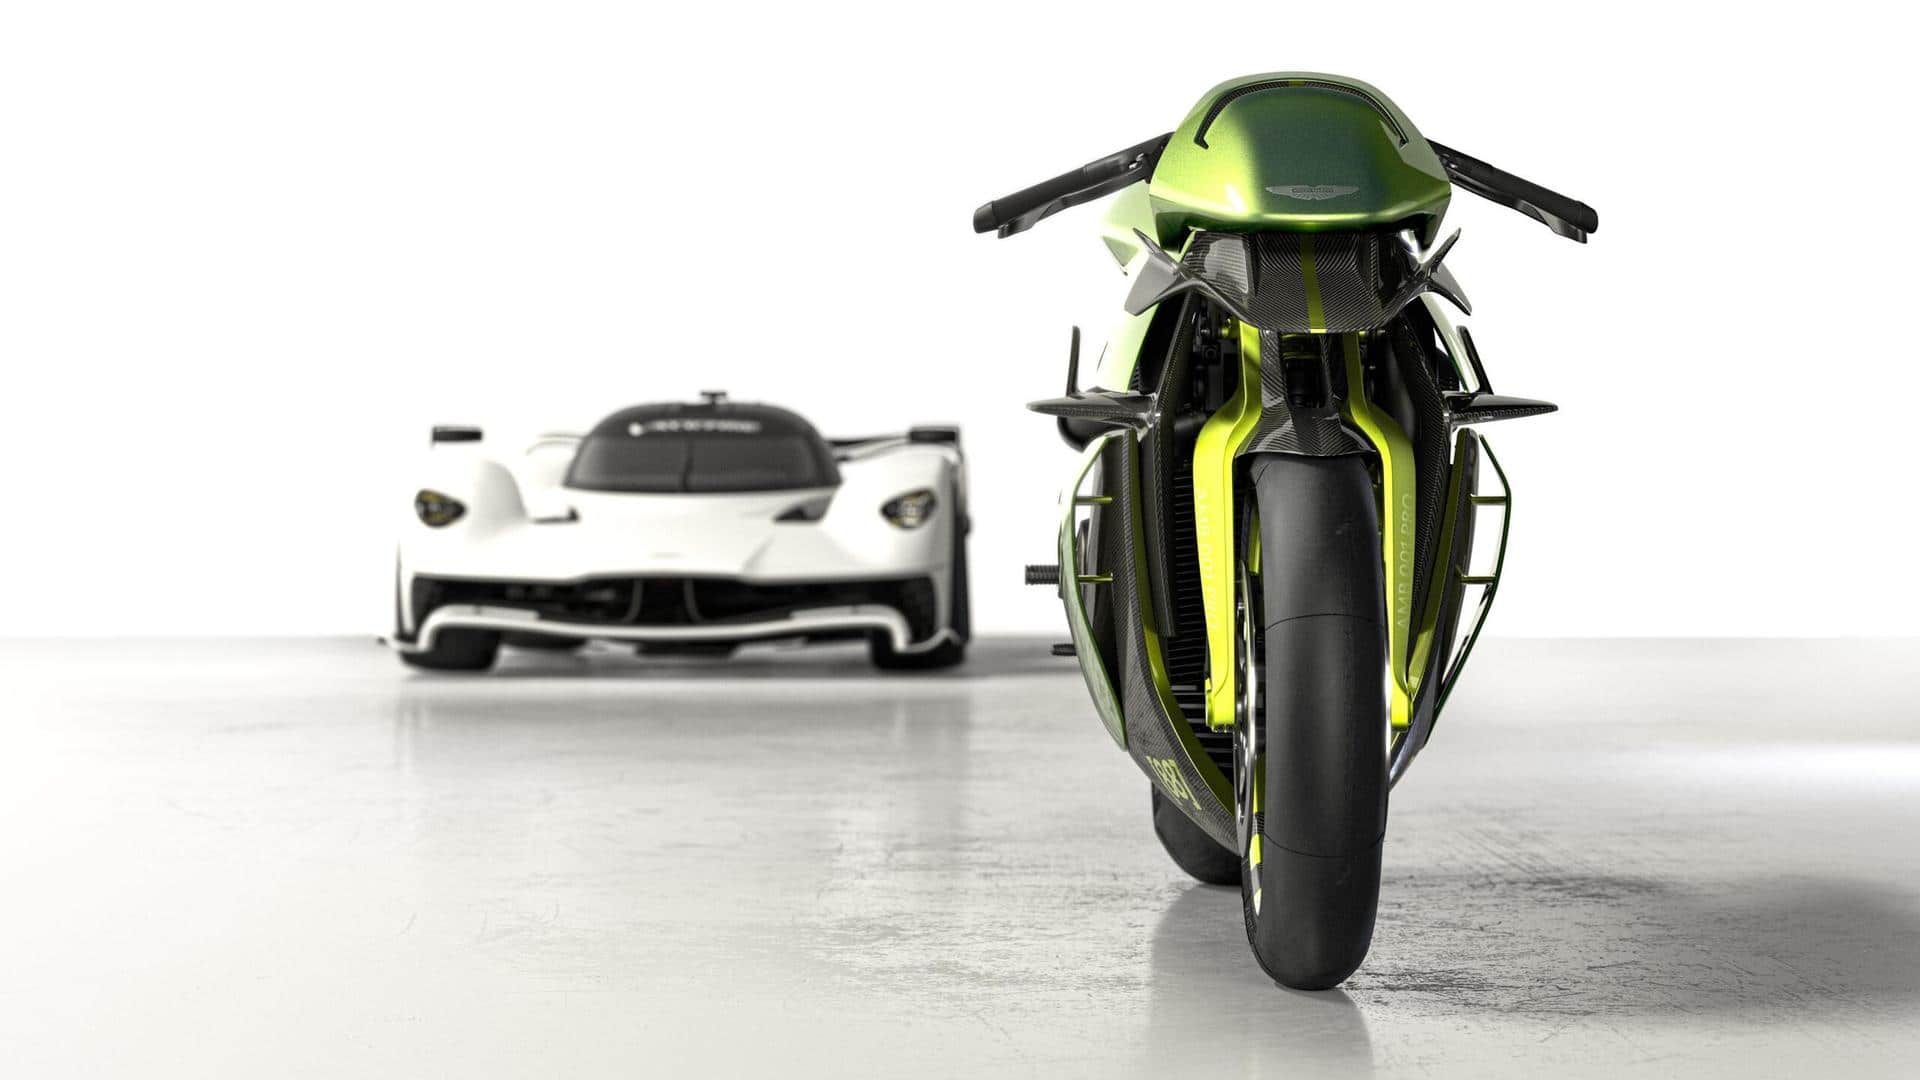 Aston Martin's AMB 001 Pro superbike is a track-only beast